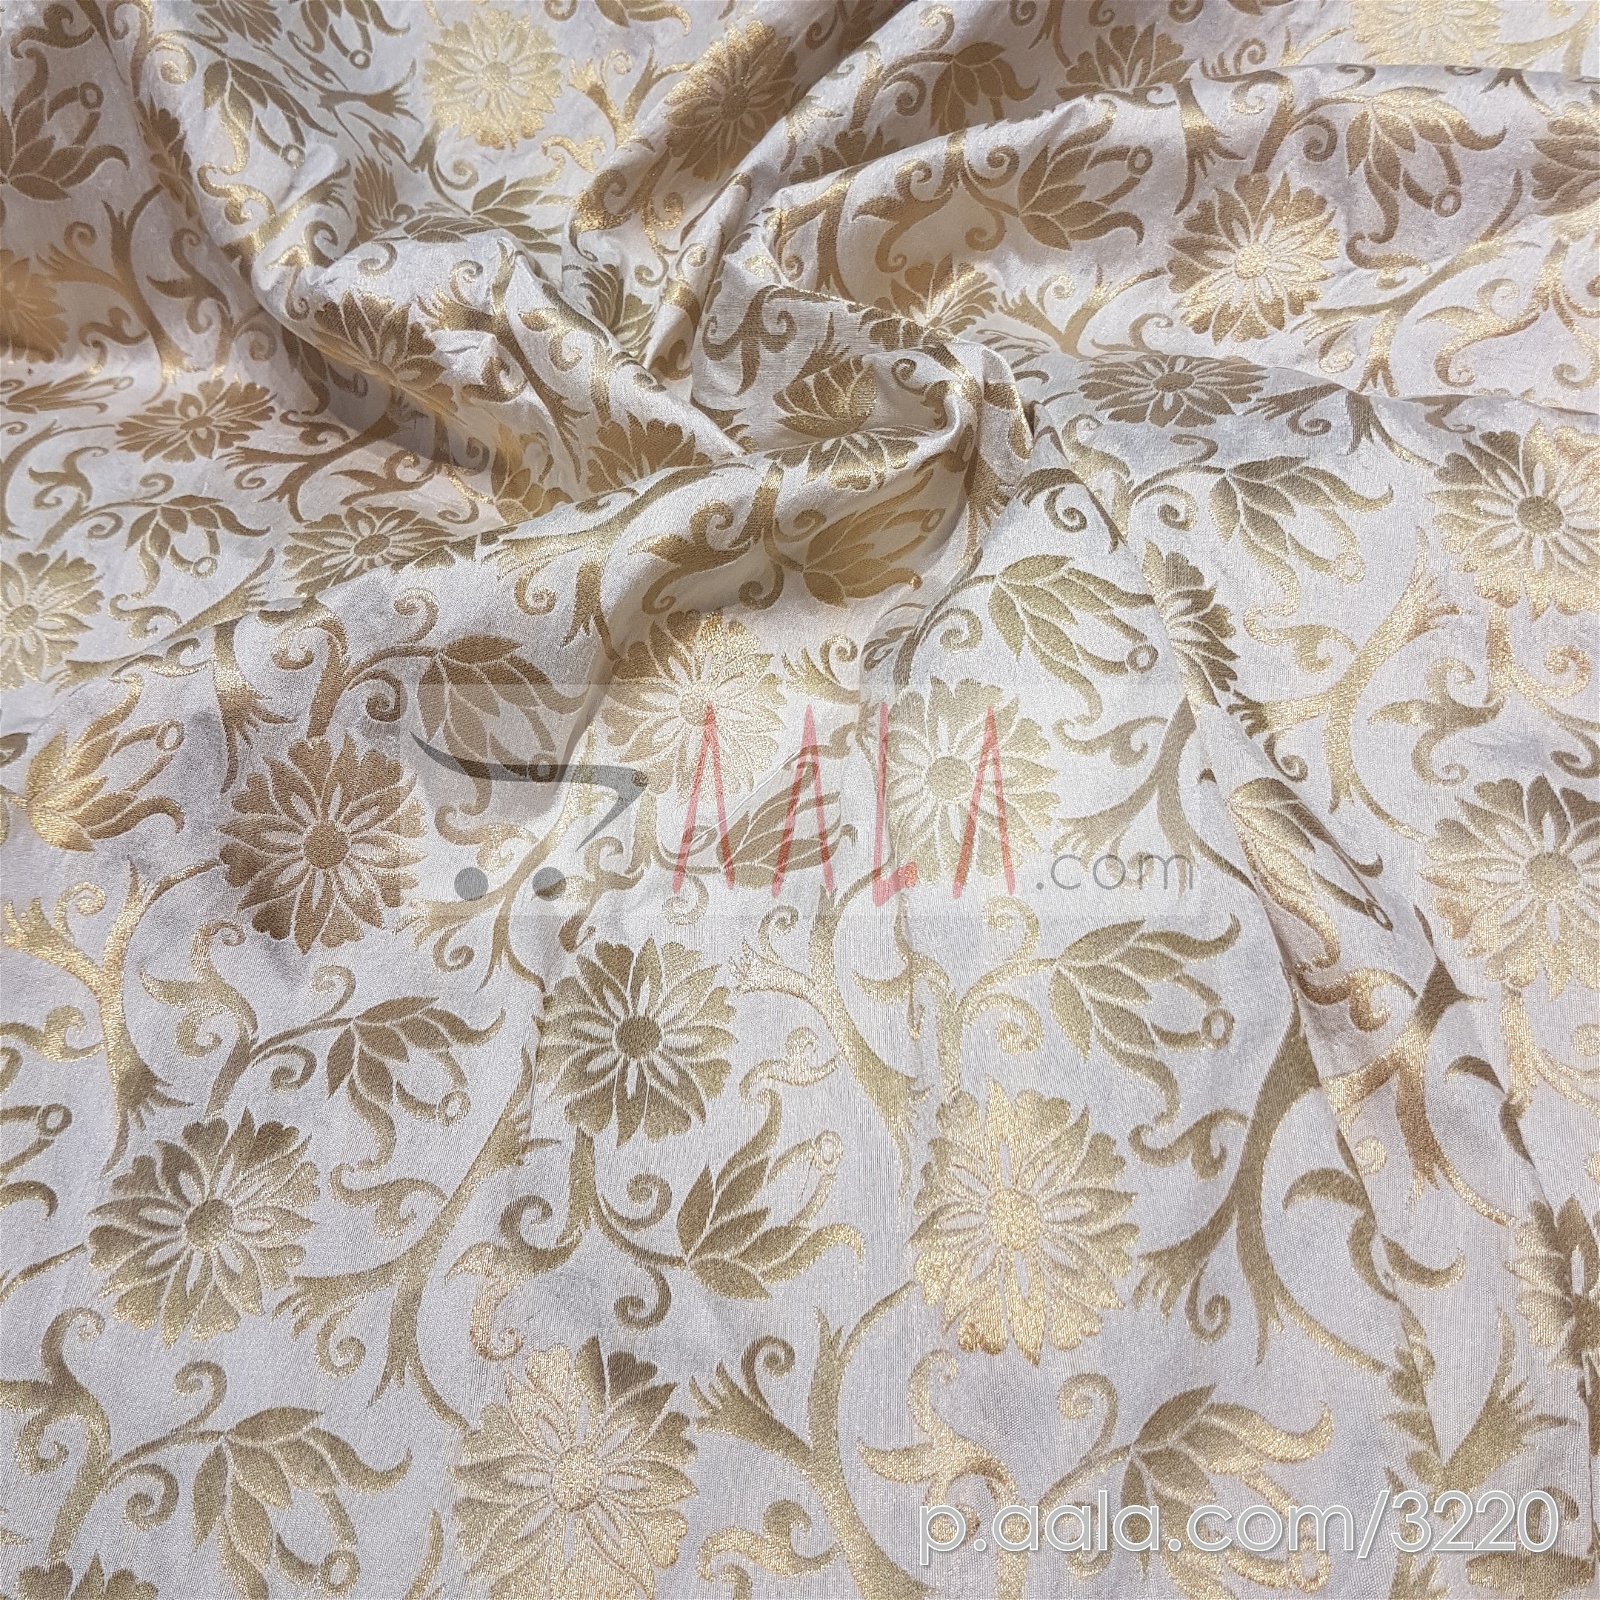 Brocade Silk Viscose 44 Inches Dyeable Per Metre #3220